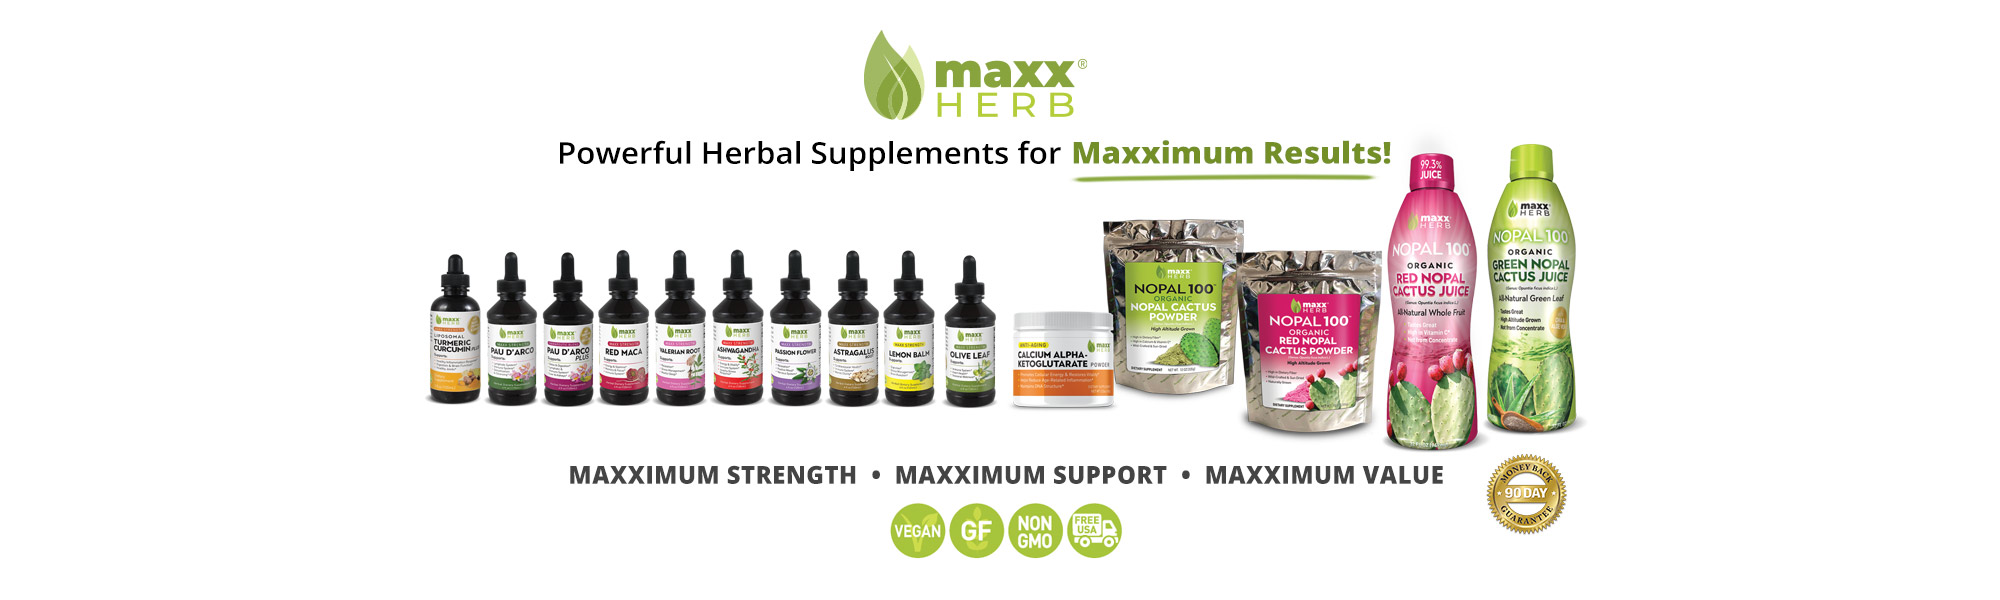 Maxx Herb's Herbal Dietary Supplements. The best quality herbal supplements for a stronger immune system and aid against inflammation. All our products come with a 90 day money back guarantee. 